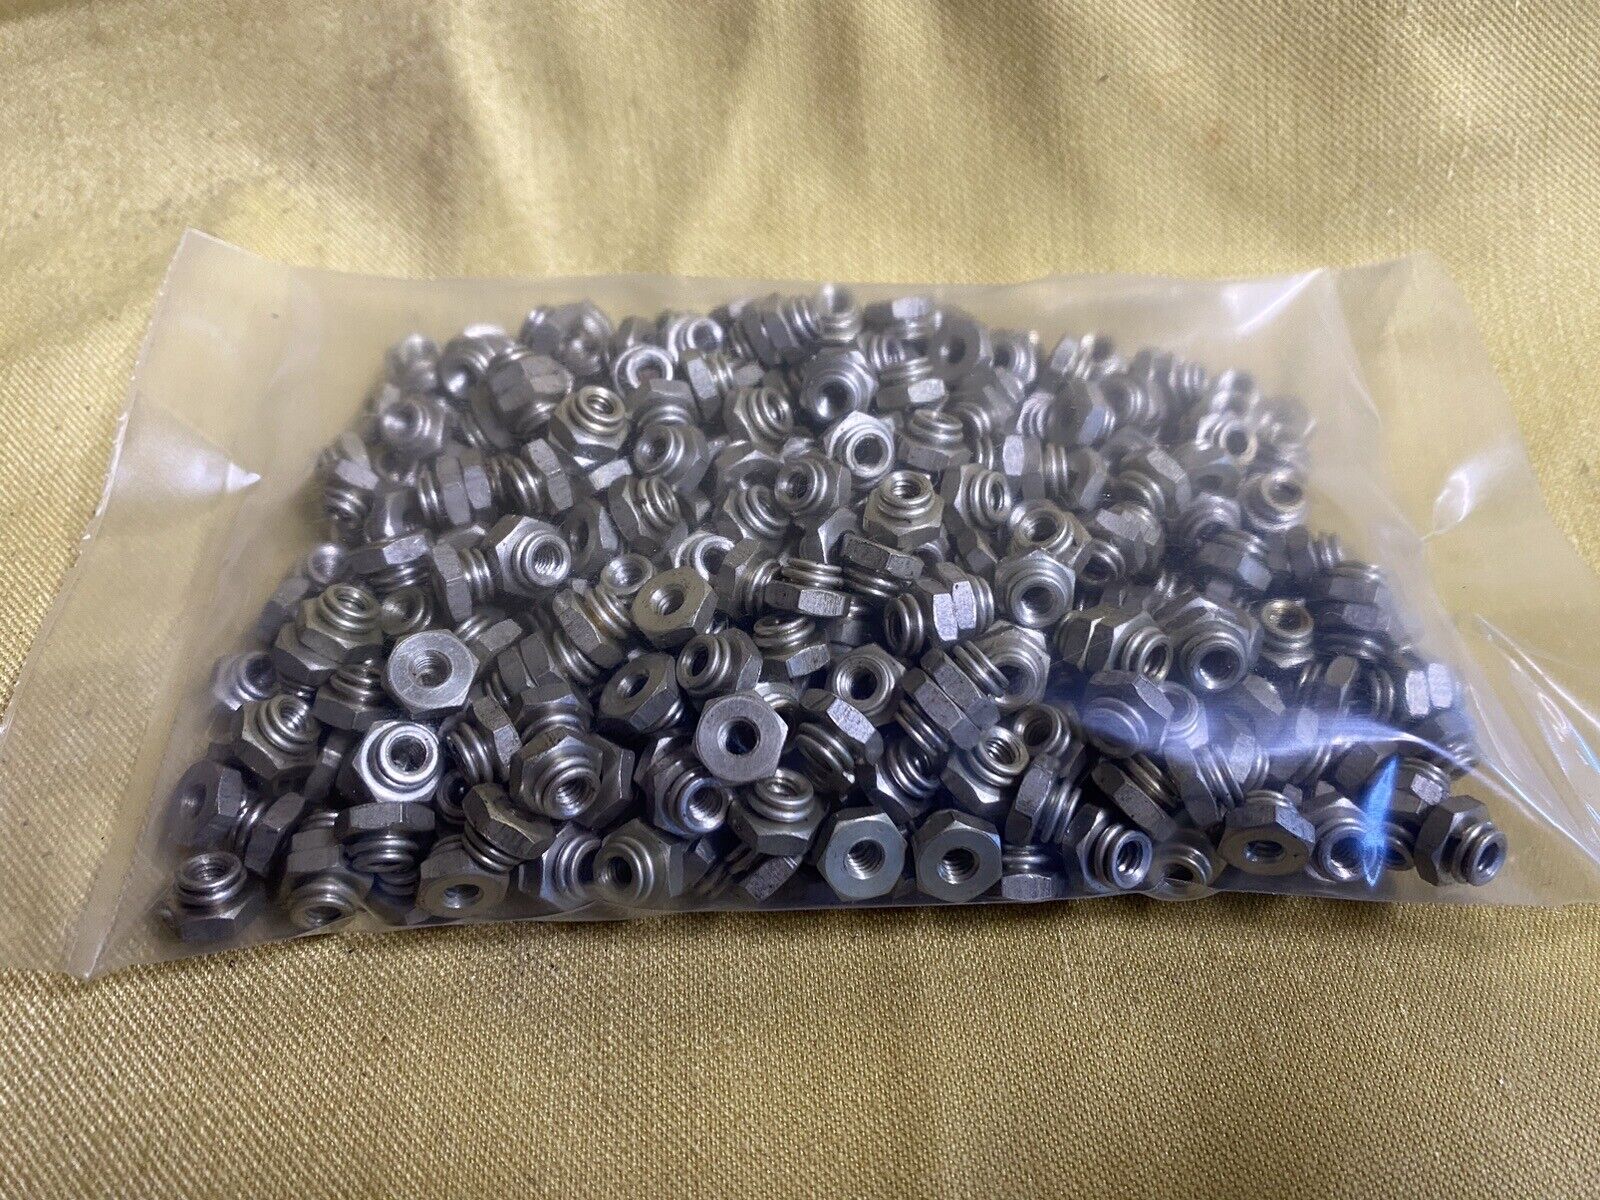 BAG OF 8/32 SELF LOCKING NUTS  New Old Stock Military  Inventory 300 CT. BAG